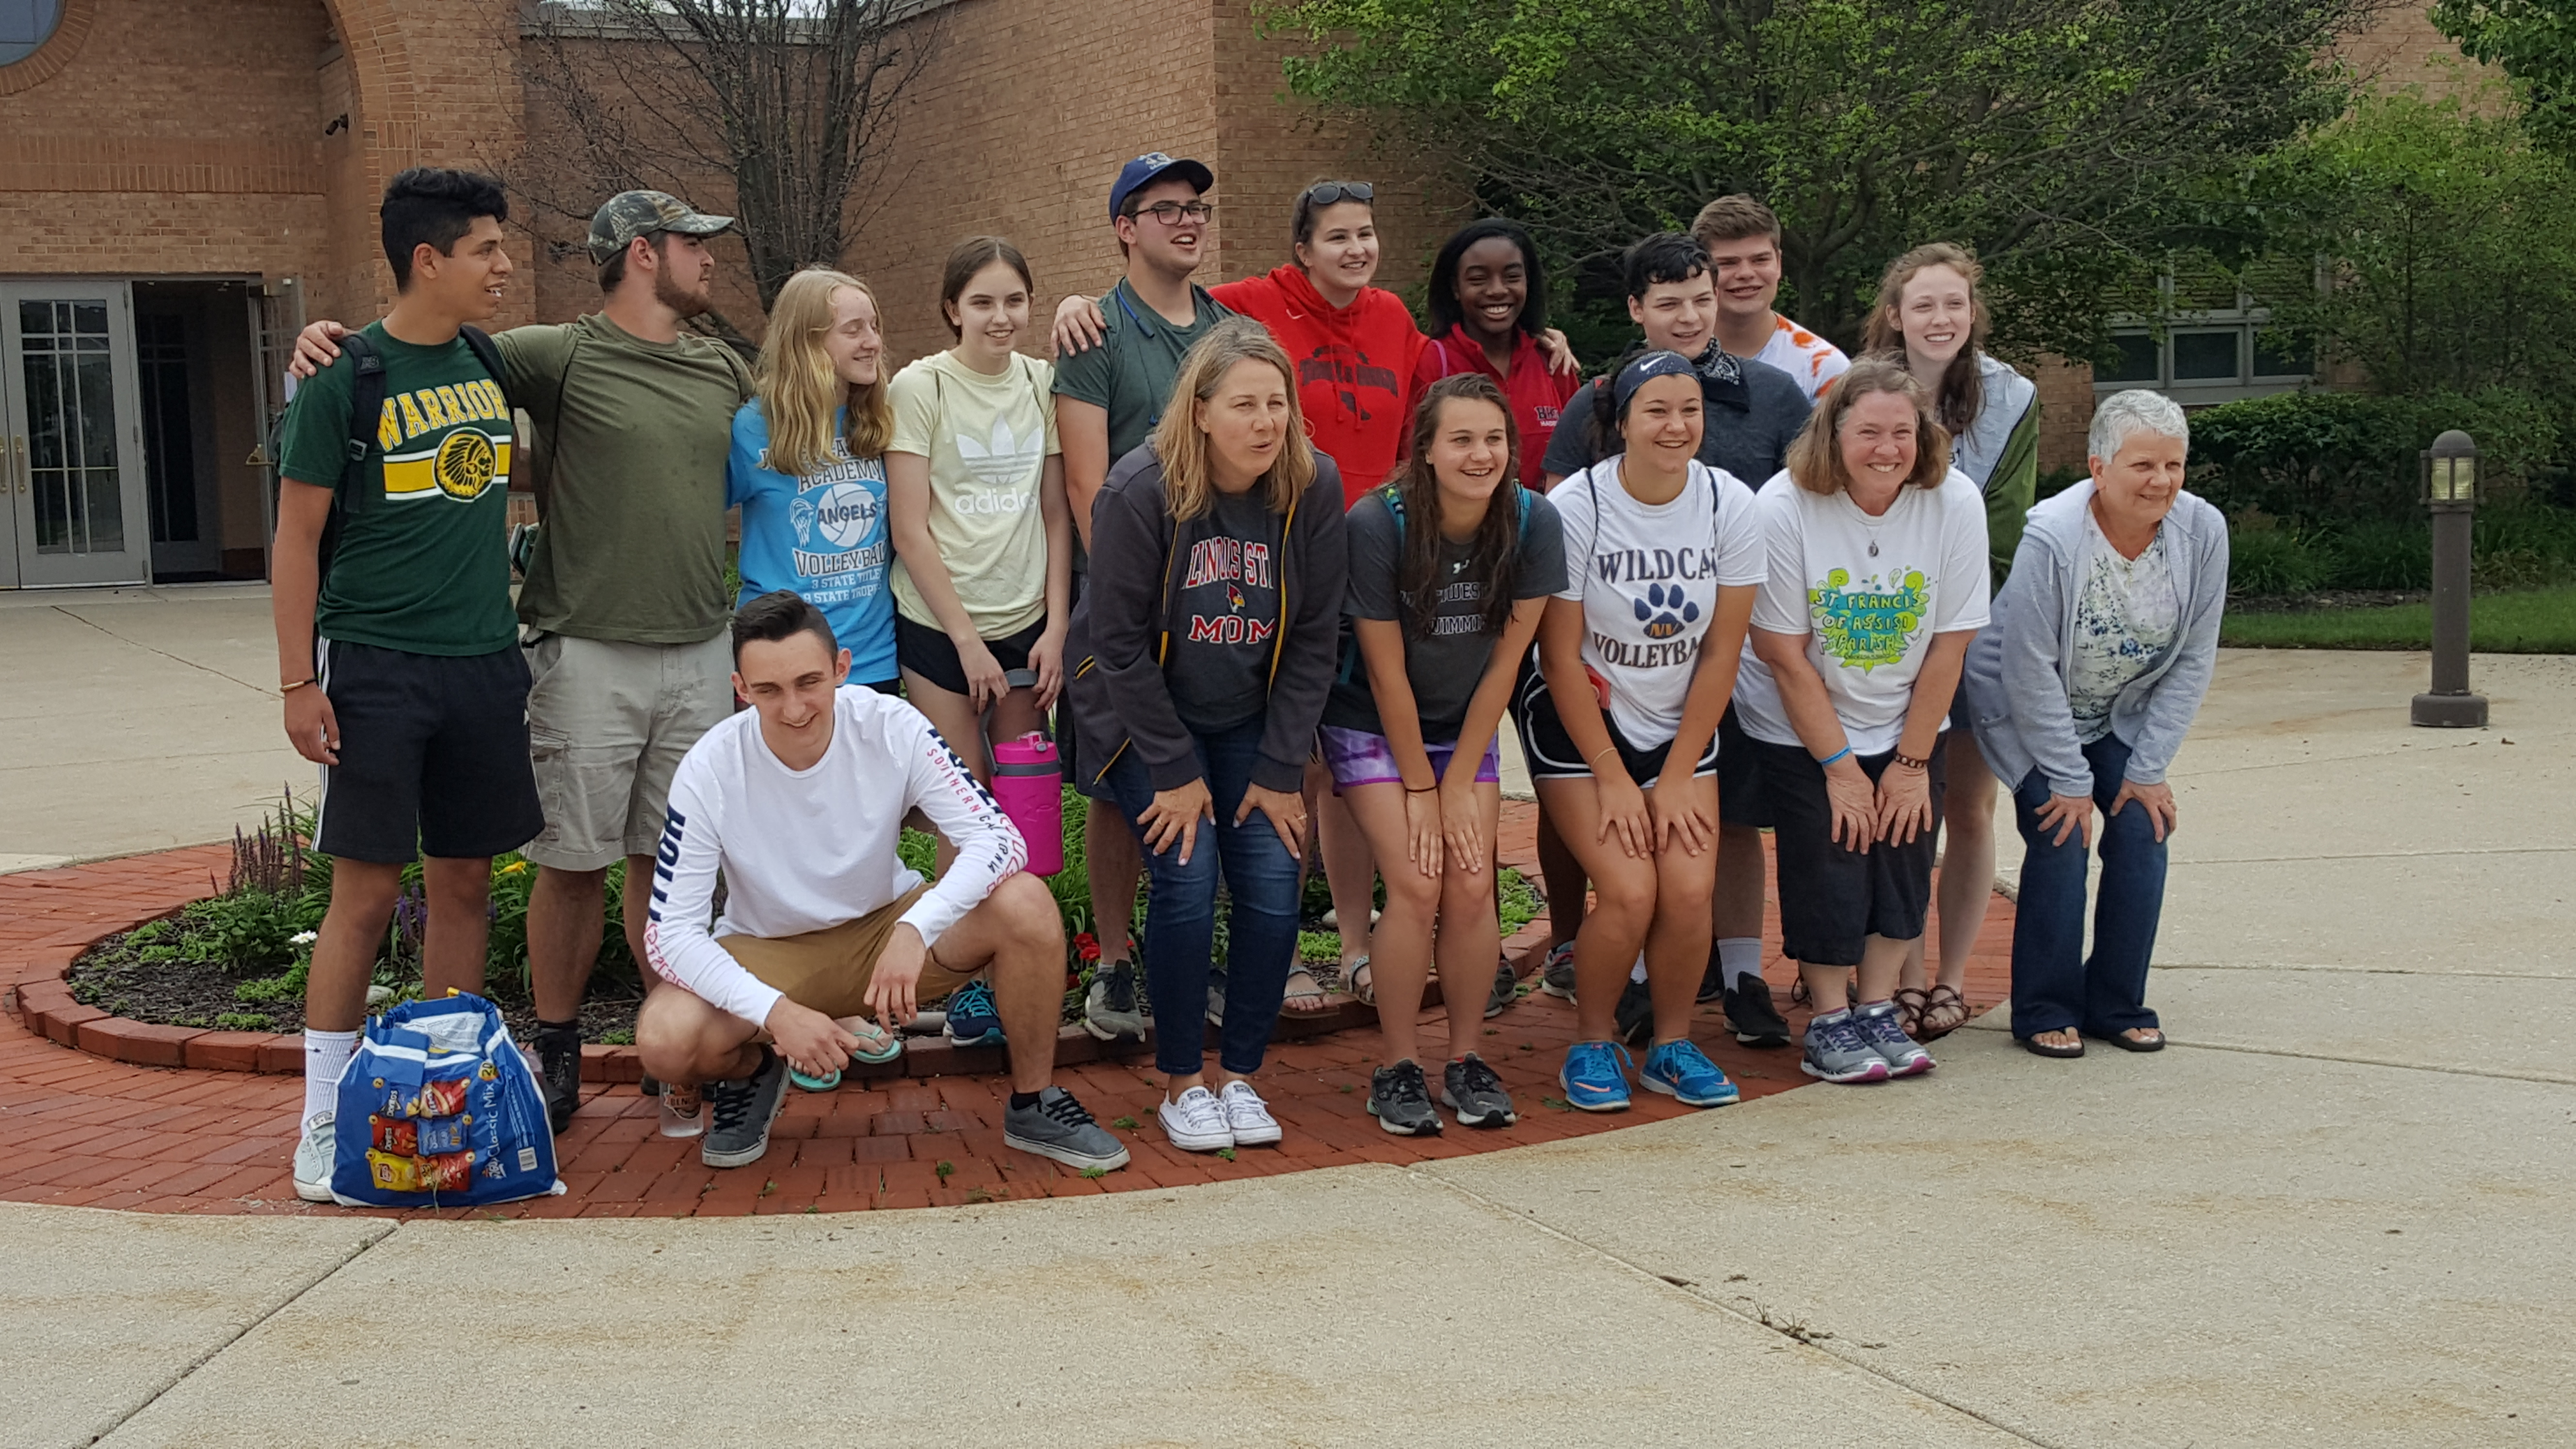 The Teen Mission Group Is On Their Mission Trip